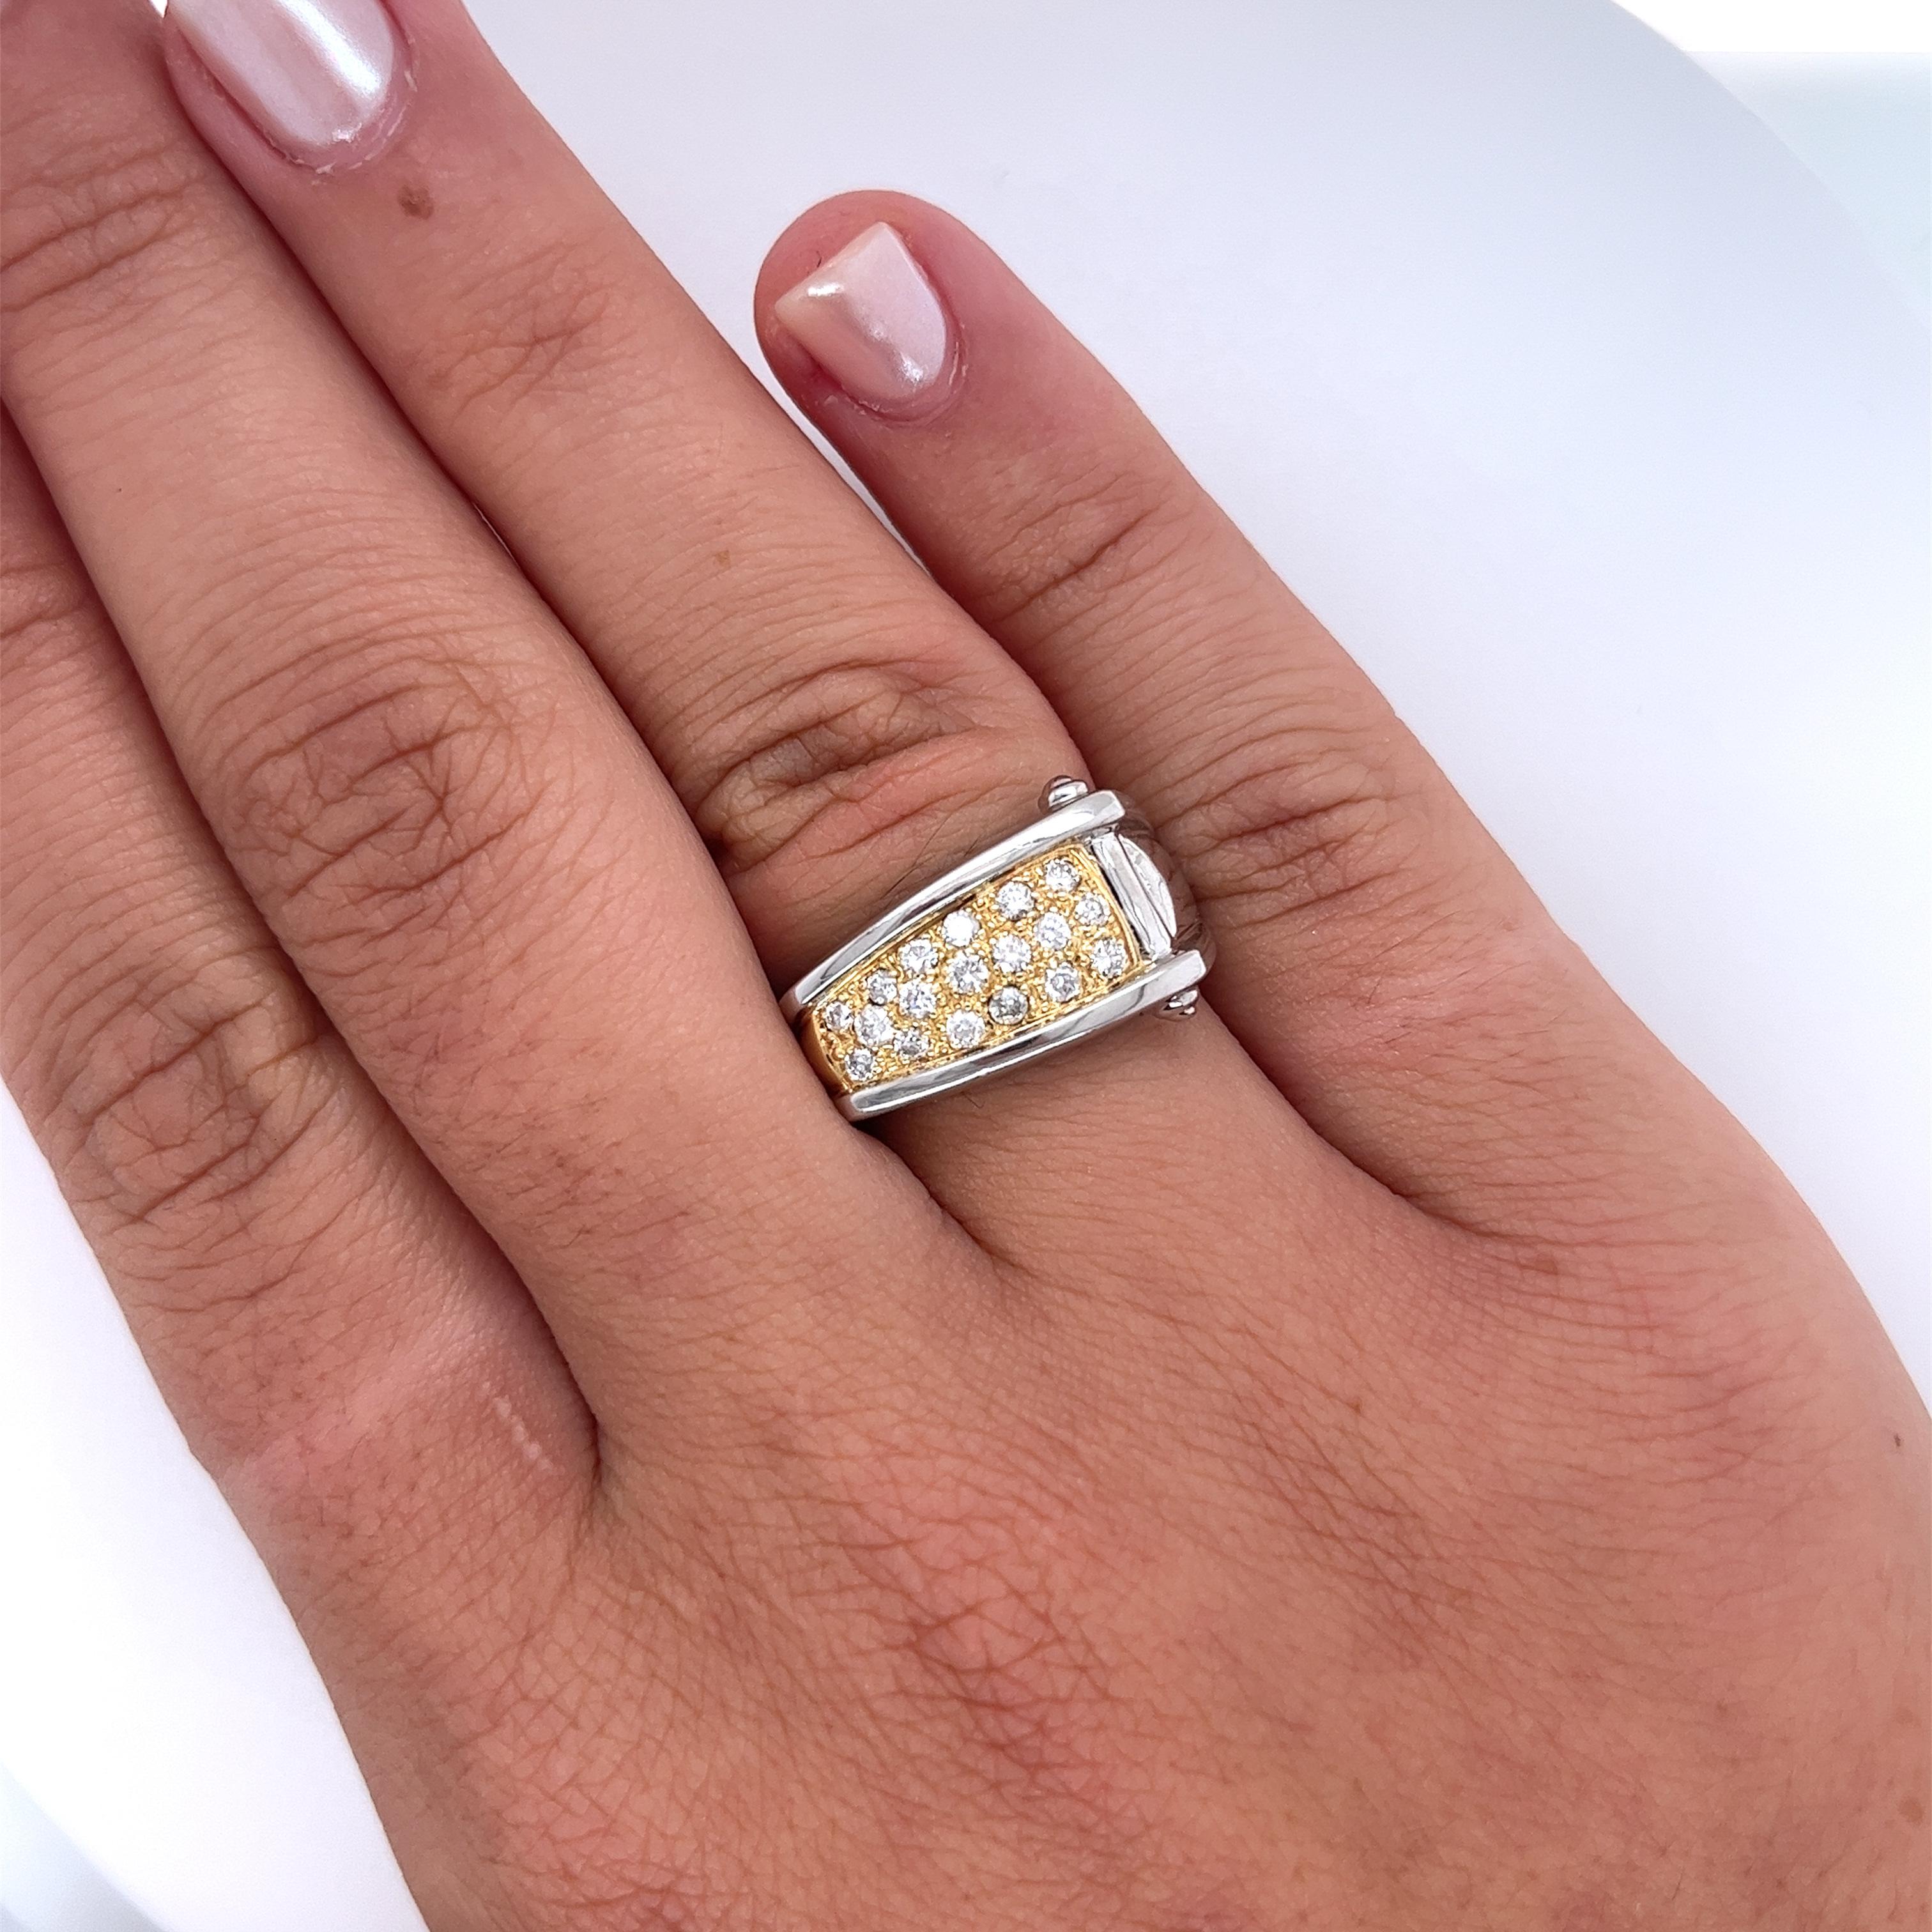 Natural round-cut diamond cluster in two-toned 18k yellow gold and platinum. Featuring an ascending ring face and smooth ends that sit beautifully on the finger. Ideal as a men's pinky ring or ladies statement ring.

The diamonds are all eye-clean